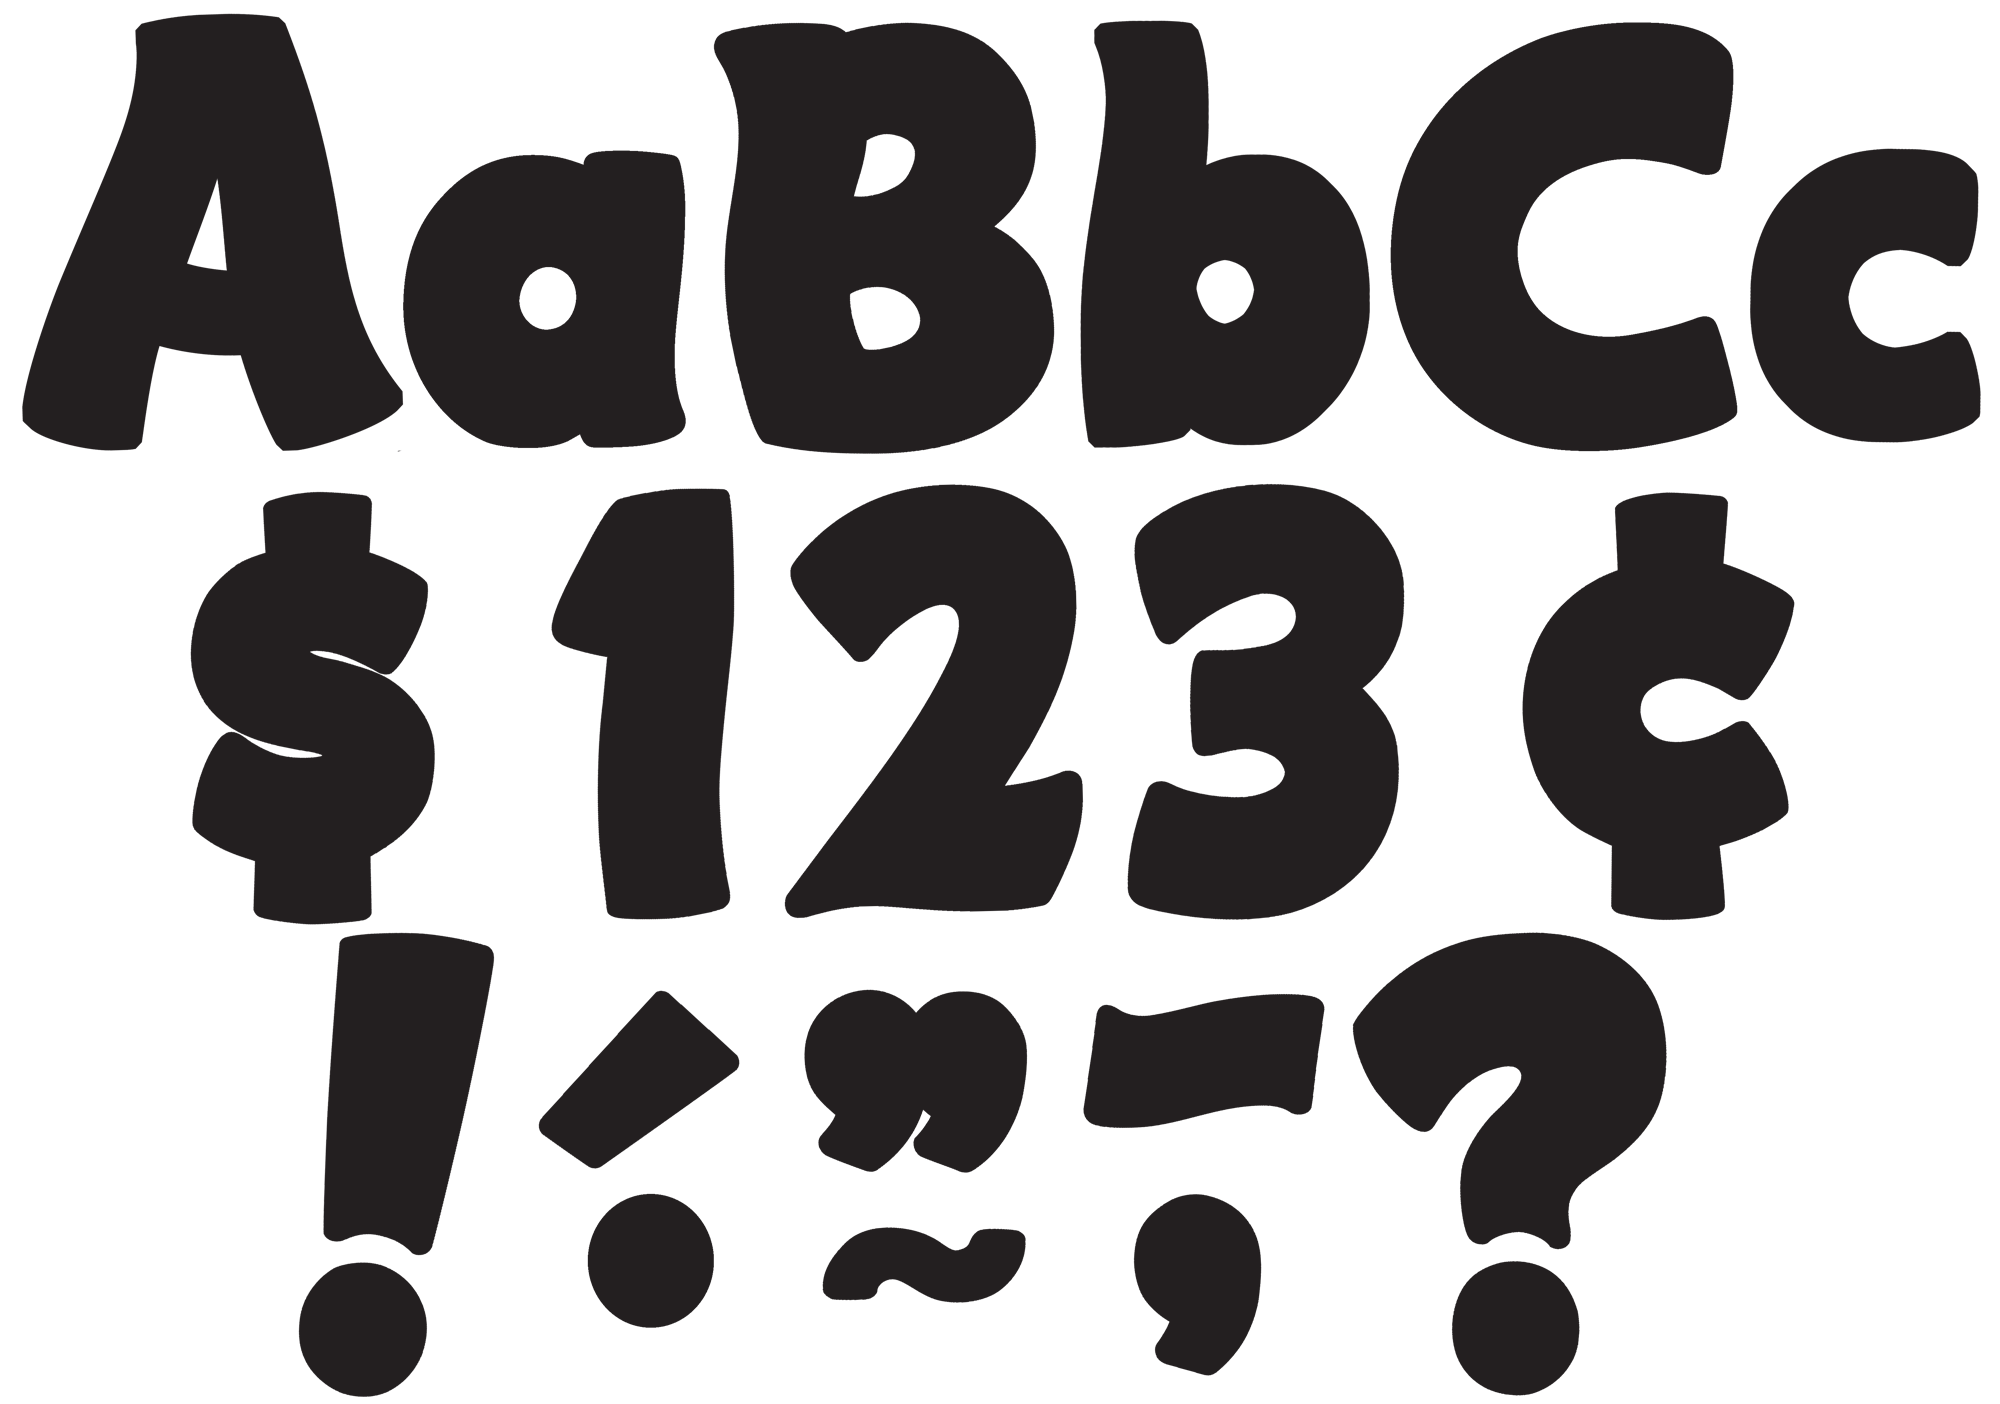 Each pack includes 208 total pieces: • 55 uppercase letters • 84 lowercase letters • 20 numbers 0 to 9 • 35 punctuation marks • 14 Spanish accent marks